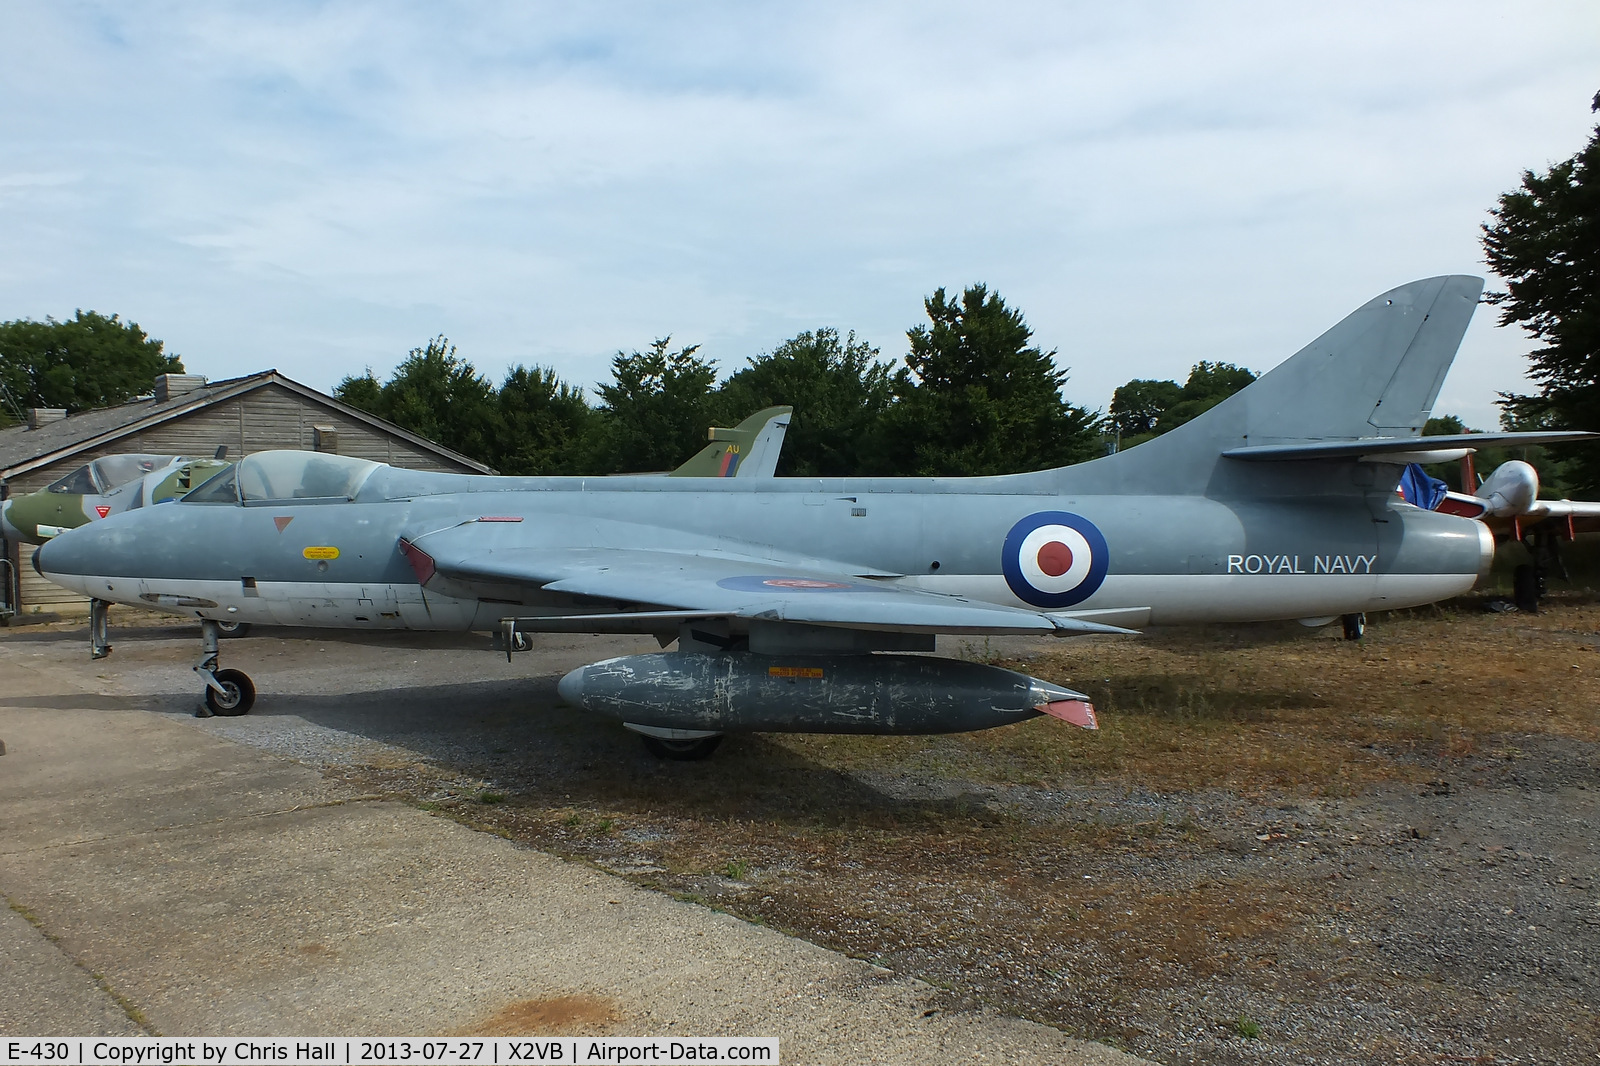 E-430, 1958 Hawker Hunter F.51 C/N 41H-680289, displayed at the Gatwick Aviation Museum